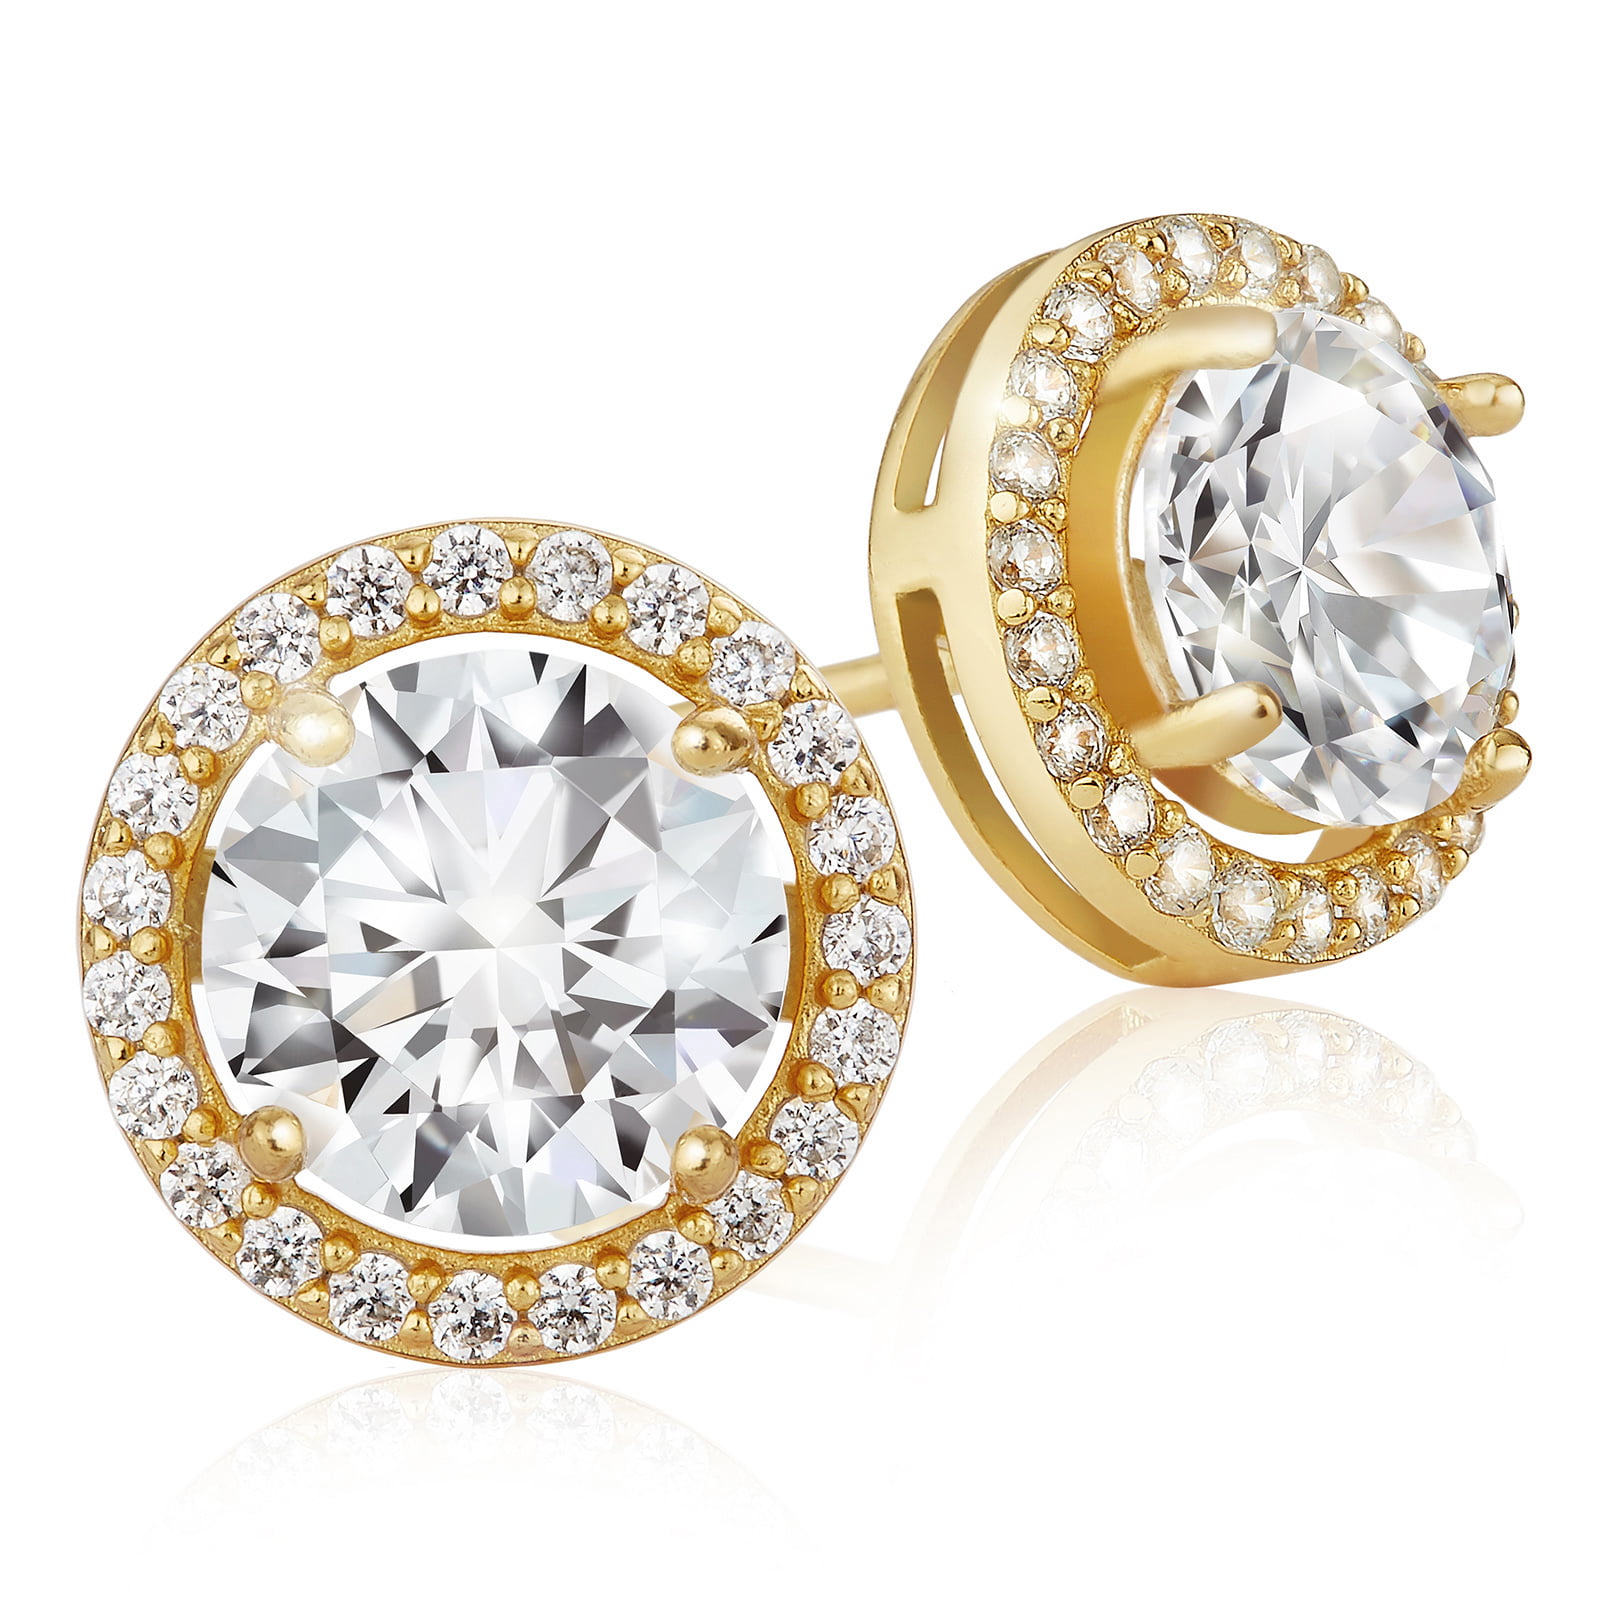 Details about   Sterling Silver Gold Over Princess Cubic Zirconia Basket Stud Men's Earrings 